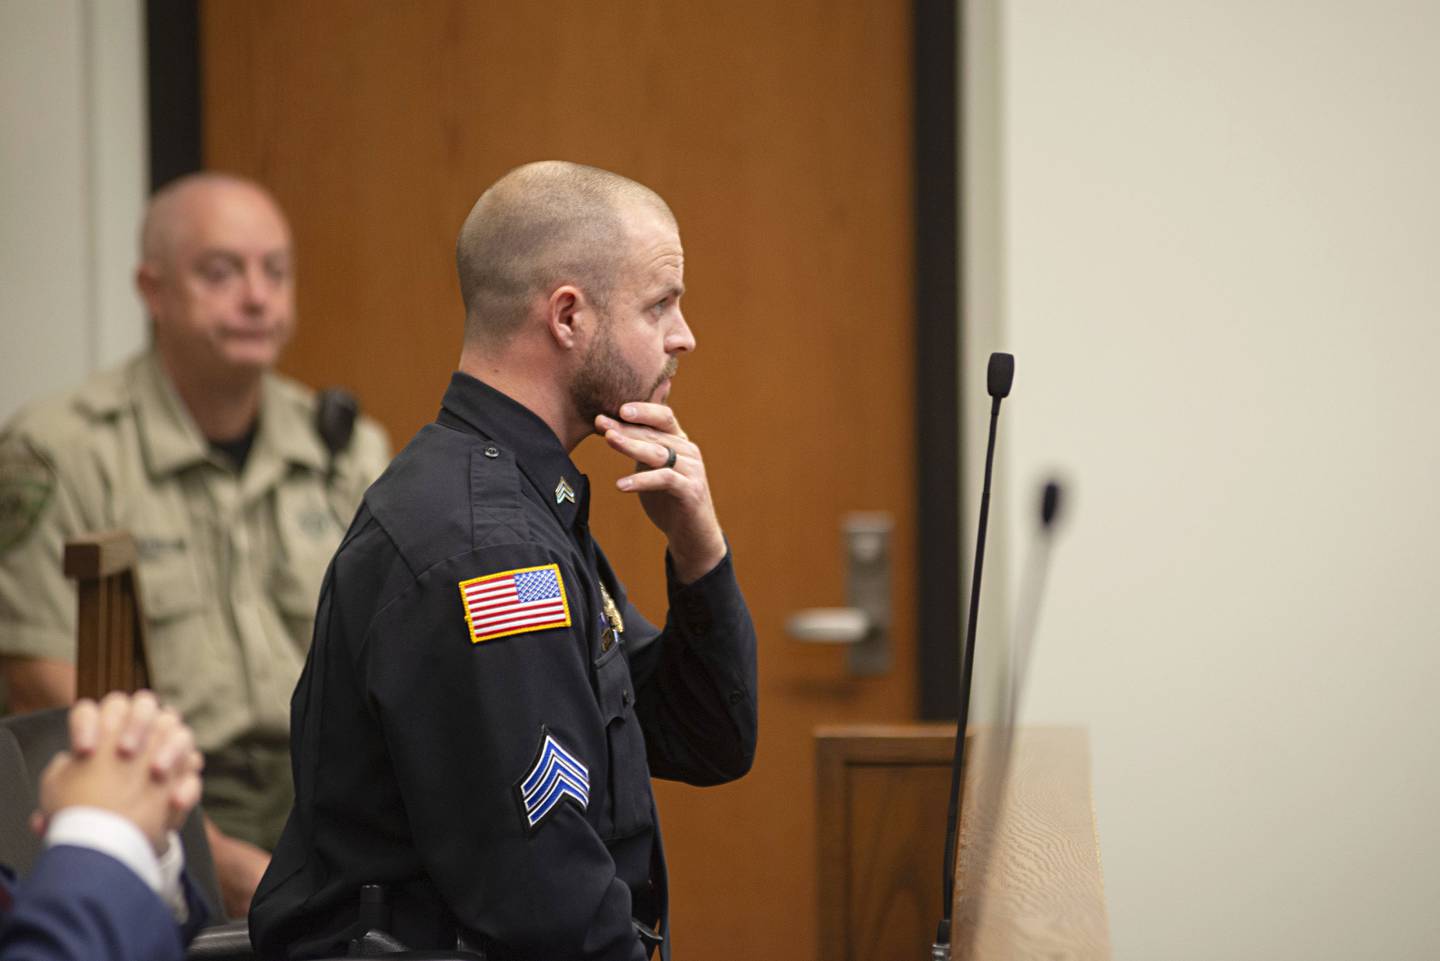 Dixon police officer Ryan Bivins watches surveillance video of the May 2018 shooting at Dixon High School by Matthew Milby. Bivins was a prosecution witness in the case.